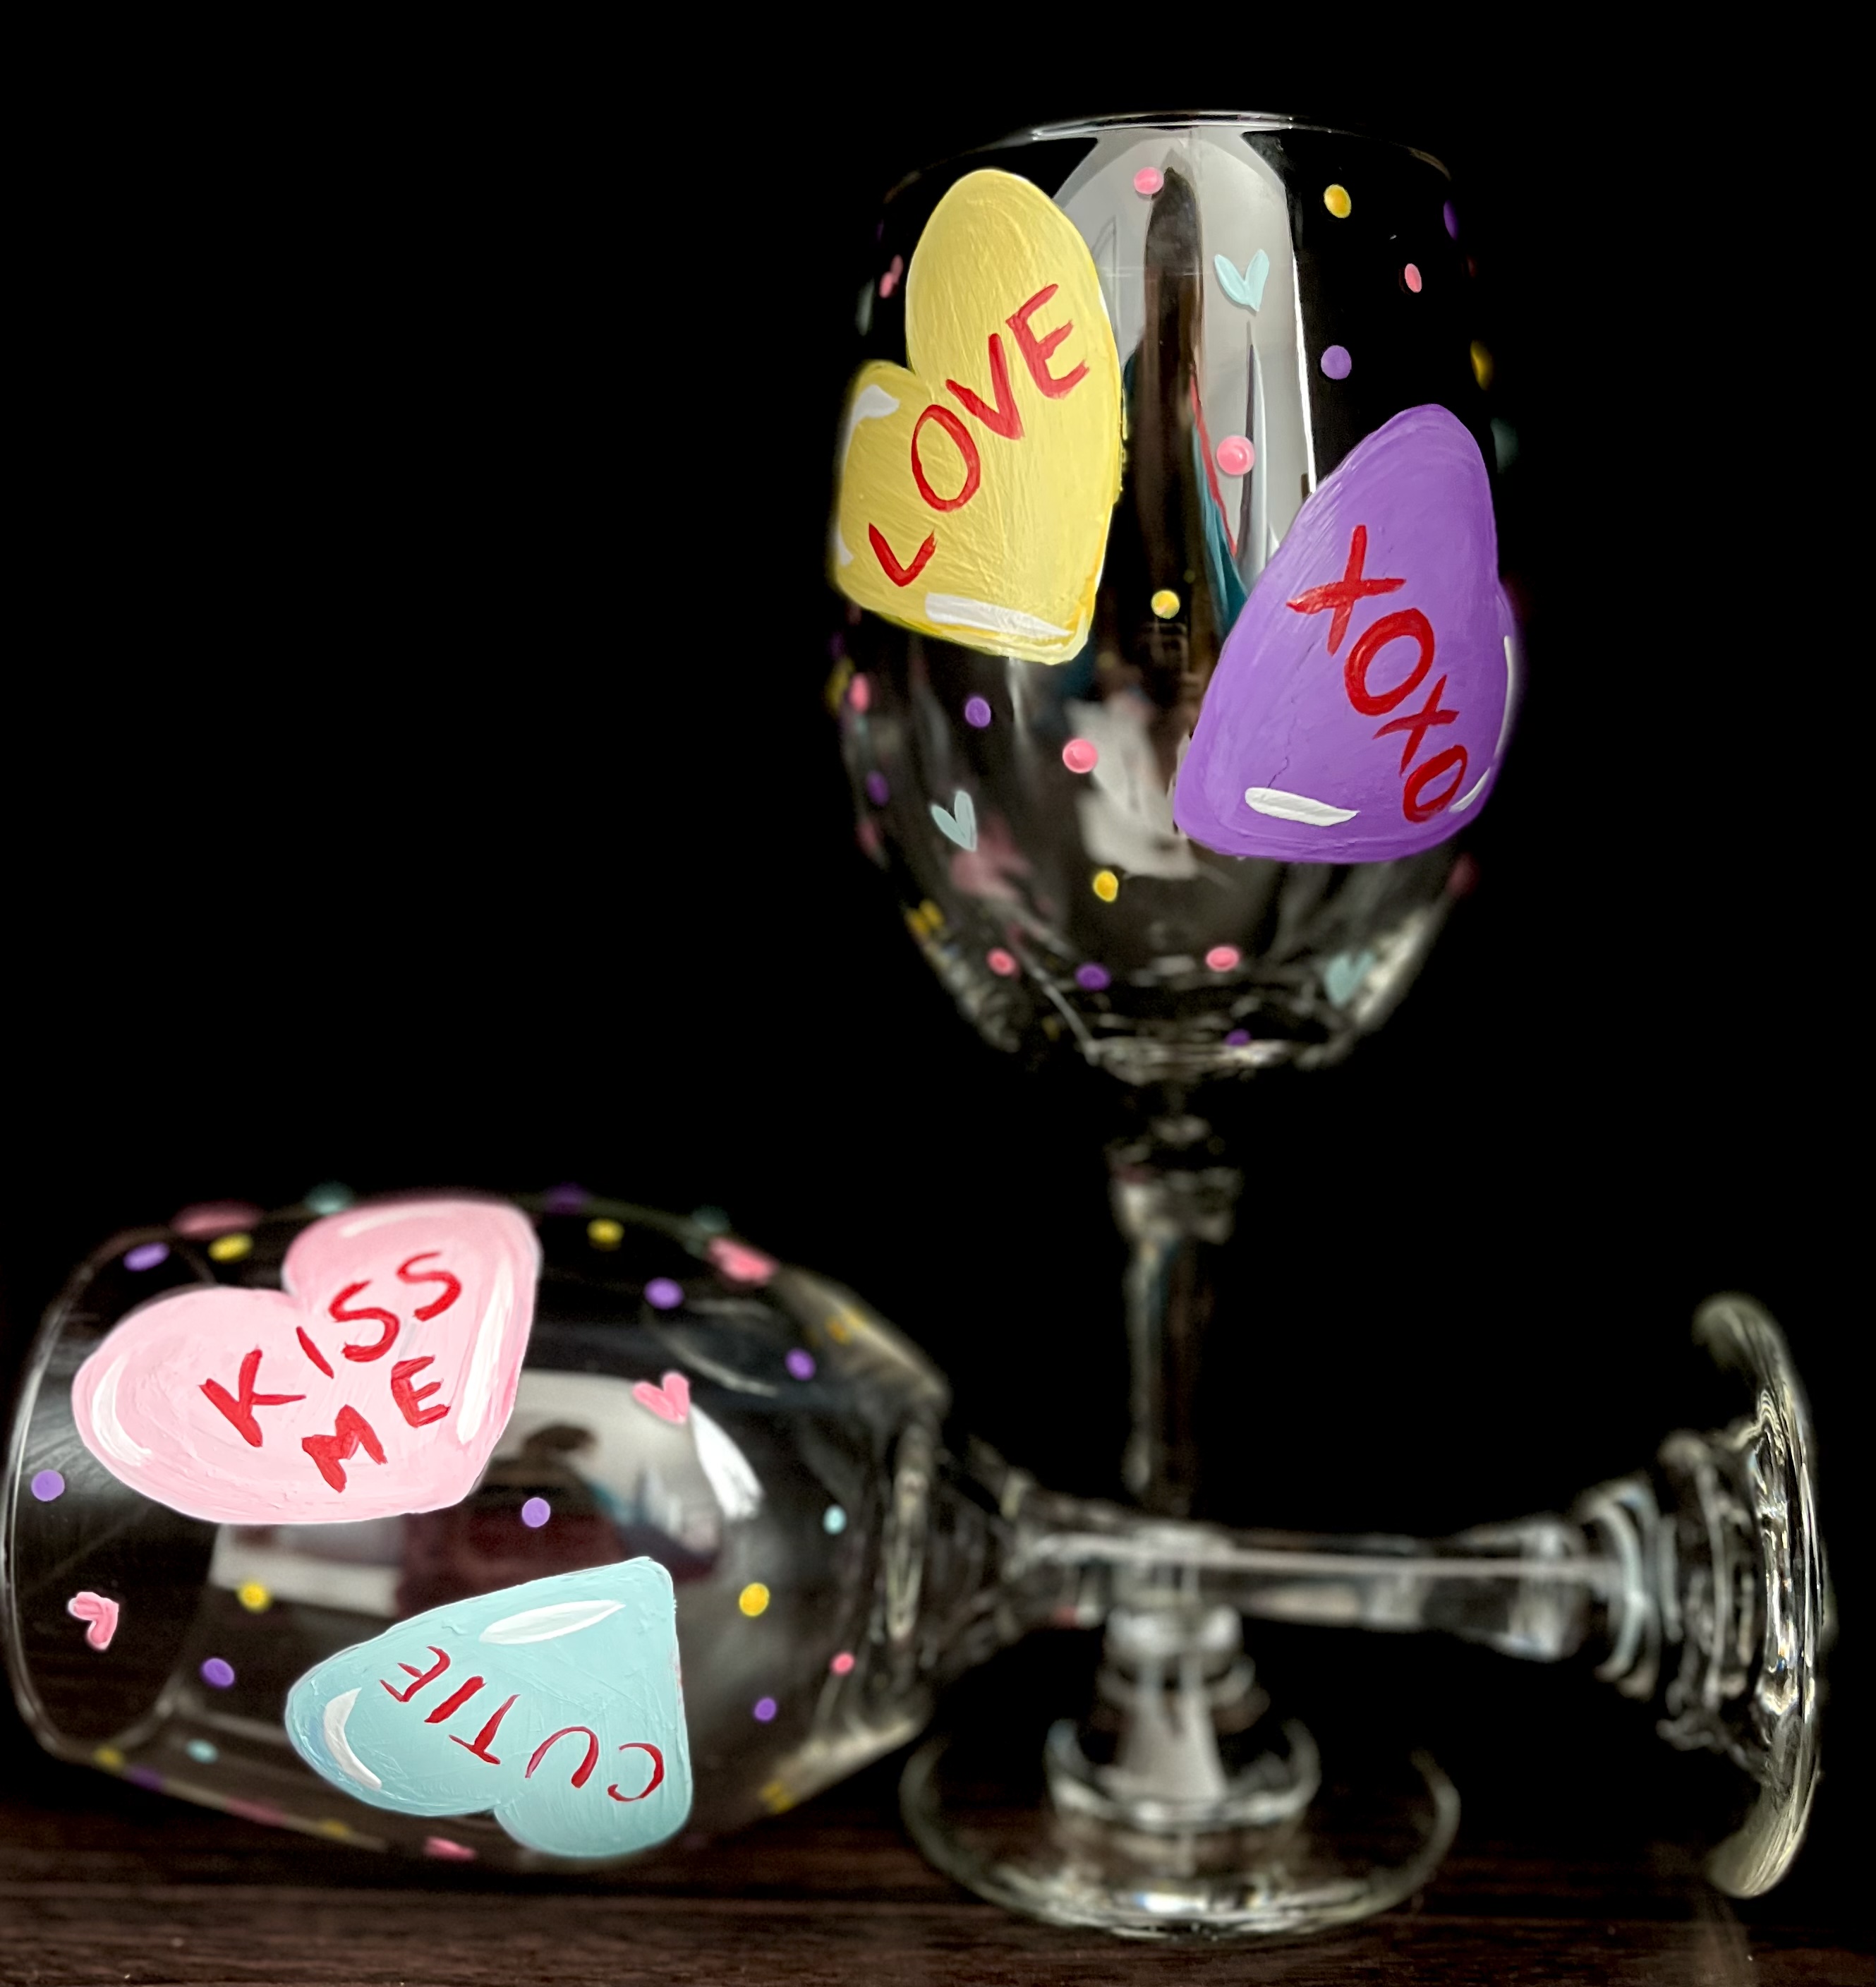 A Candy Love Wine Glasses  experience project by Yaymaker